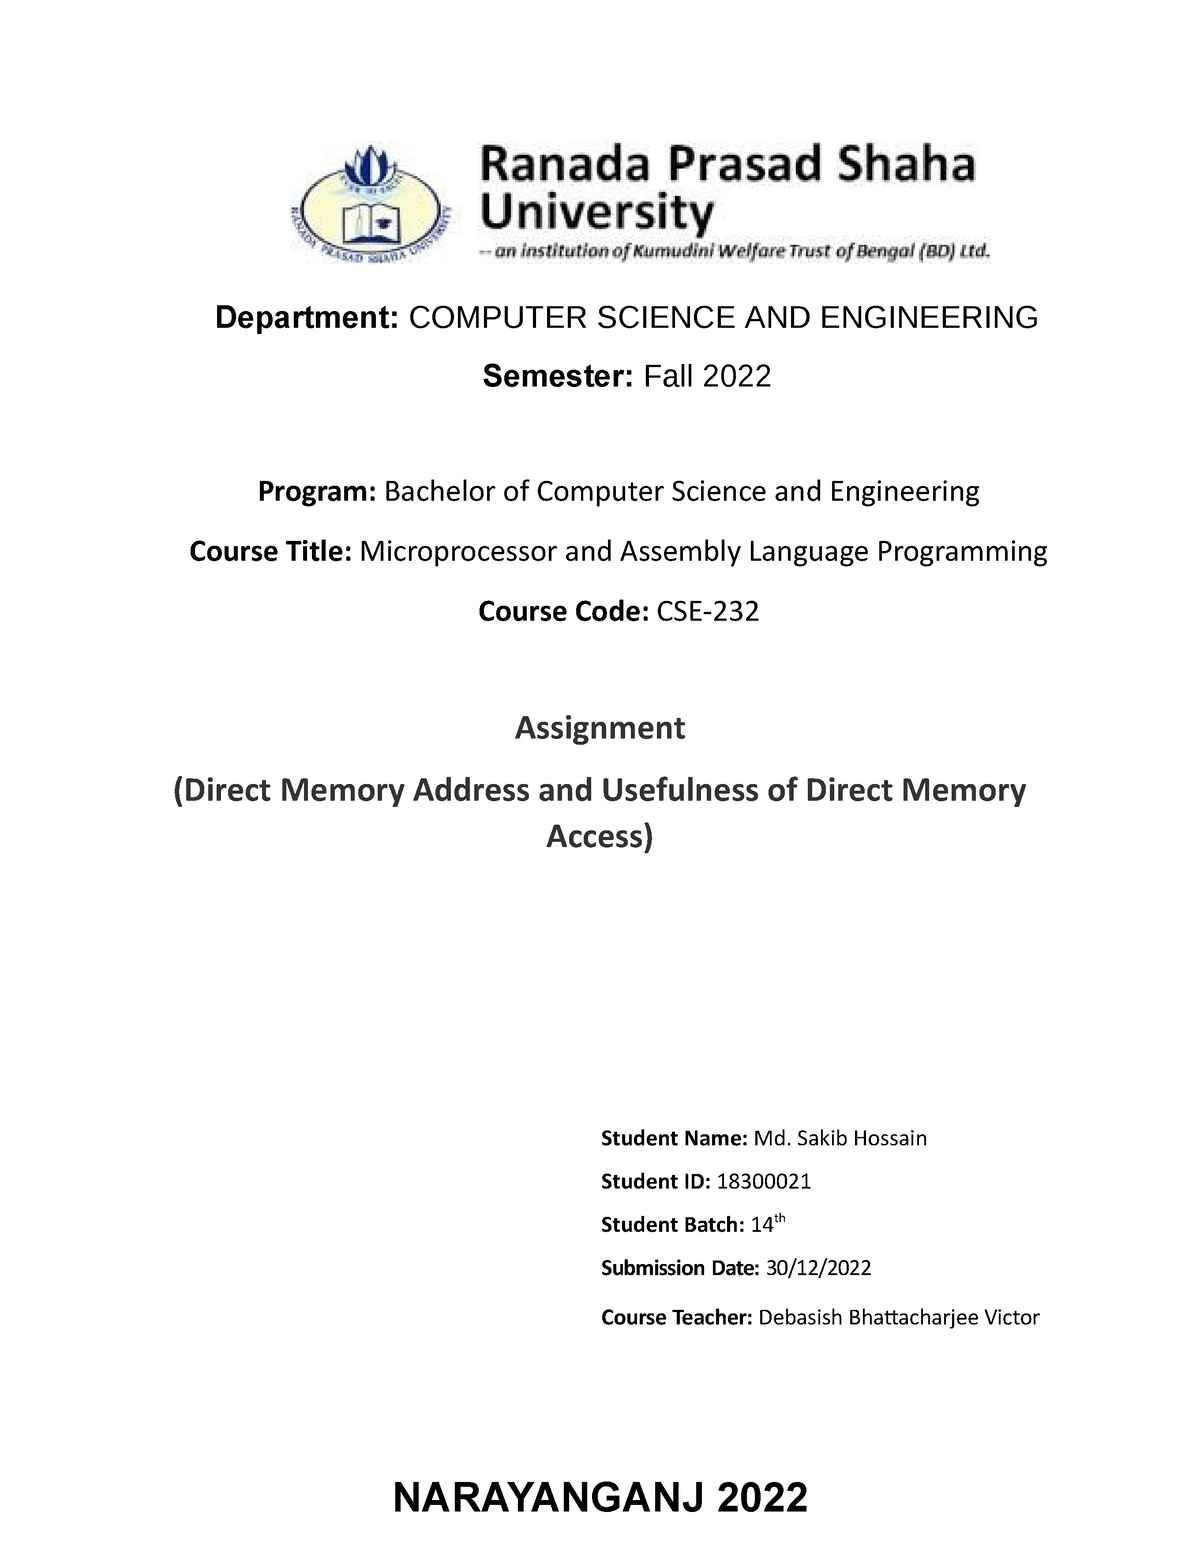 Malp-assignment - Direct Memory Address and Usefulness of Direct Memory ...